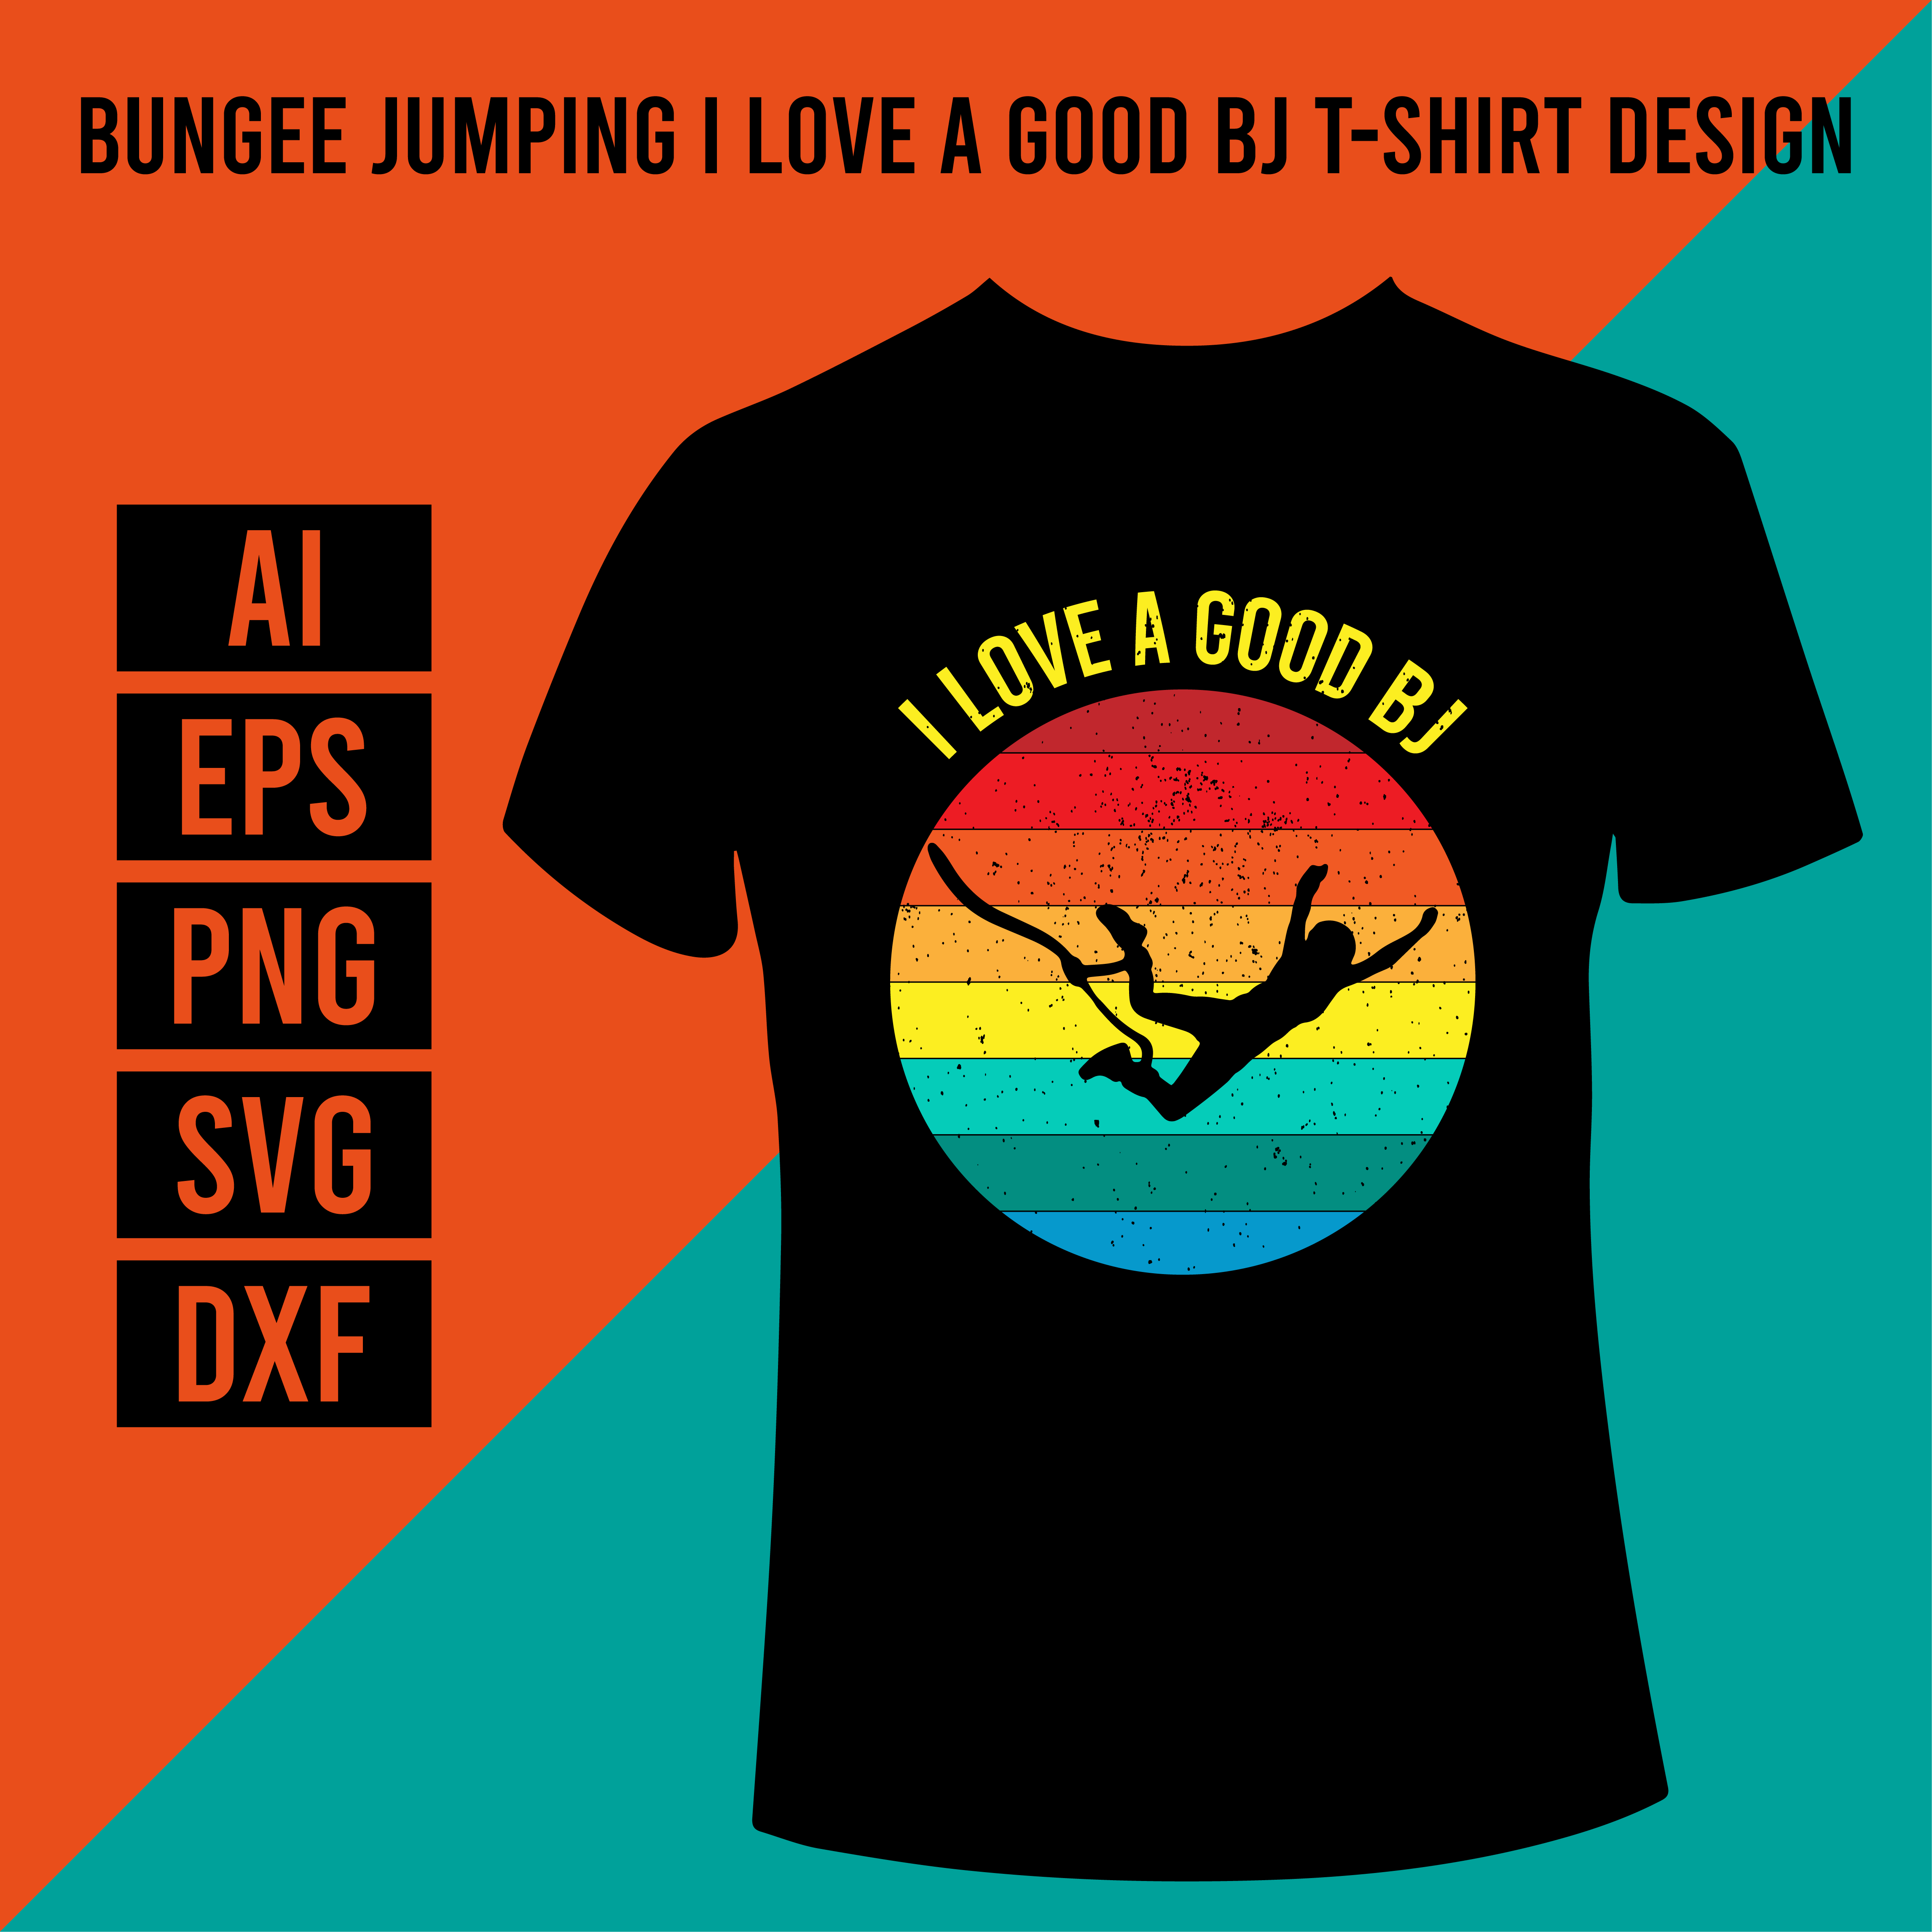 Bungee Jumping I Love A Good BJ T-Shirt Design cover image.